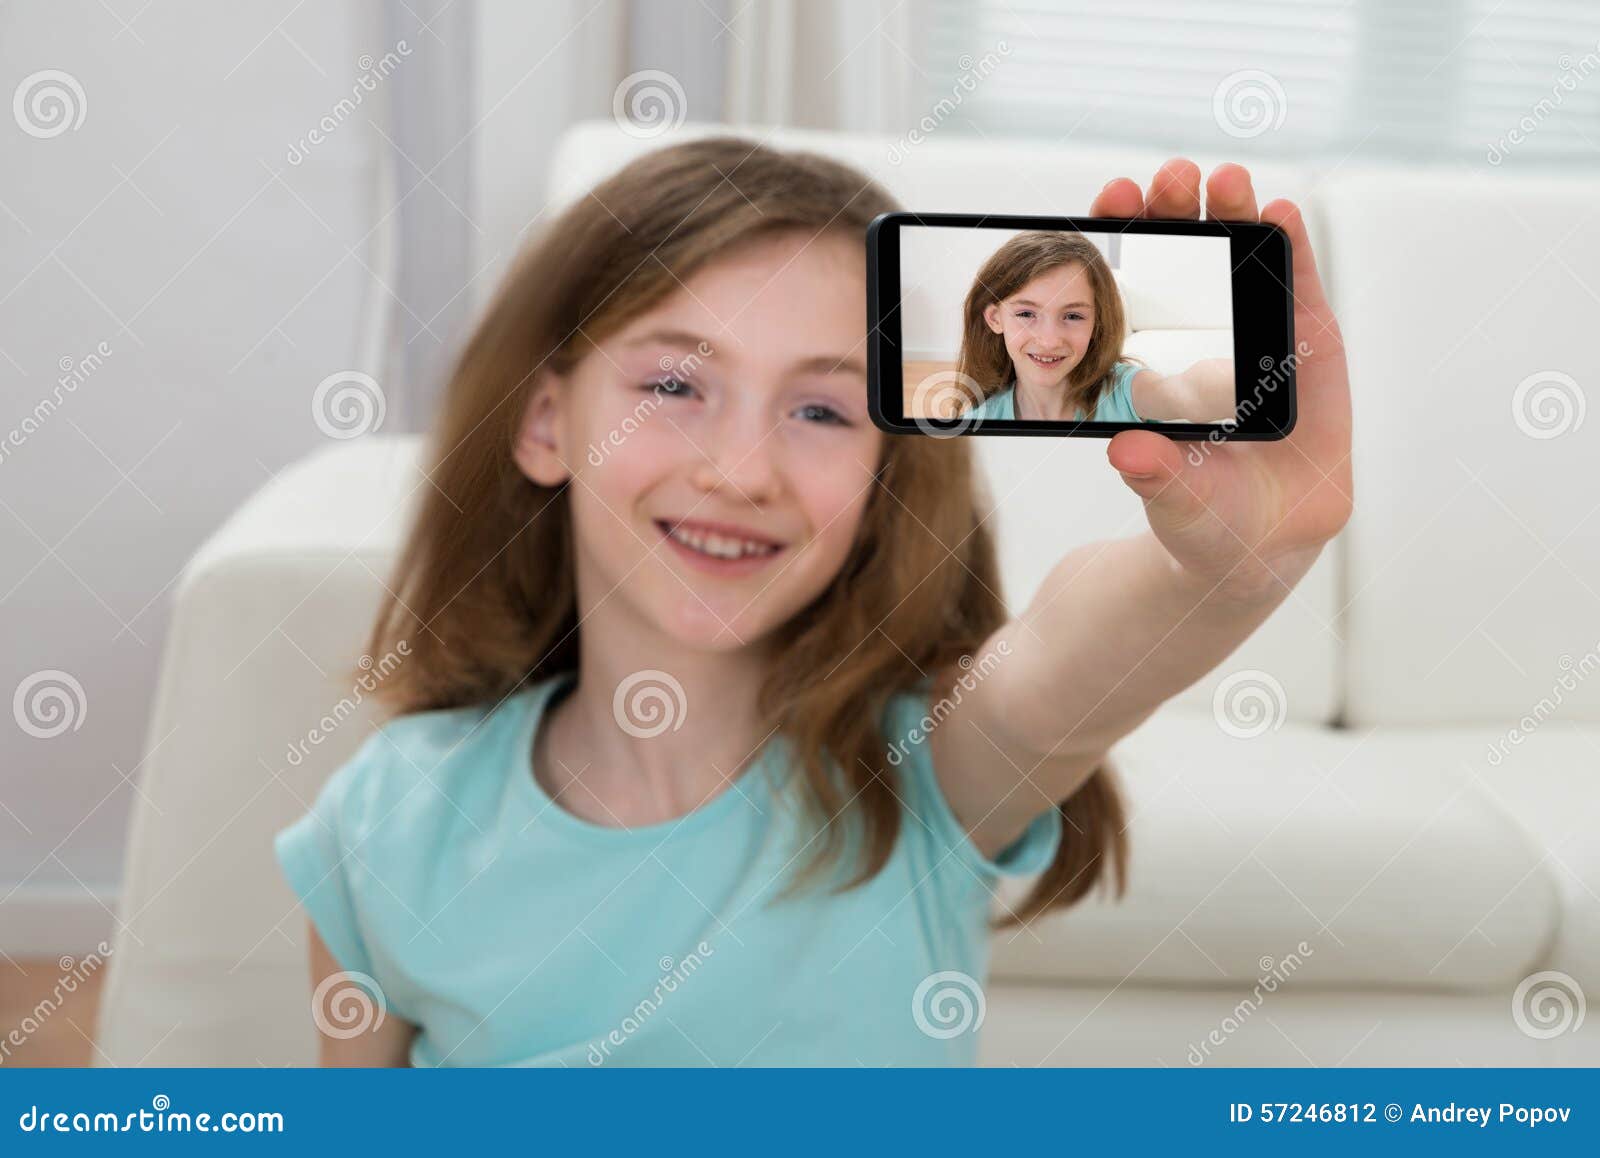 Girl Taking Selfie with Mobile Phone Stock Photo - Image of communicate ...